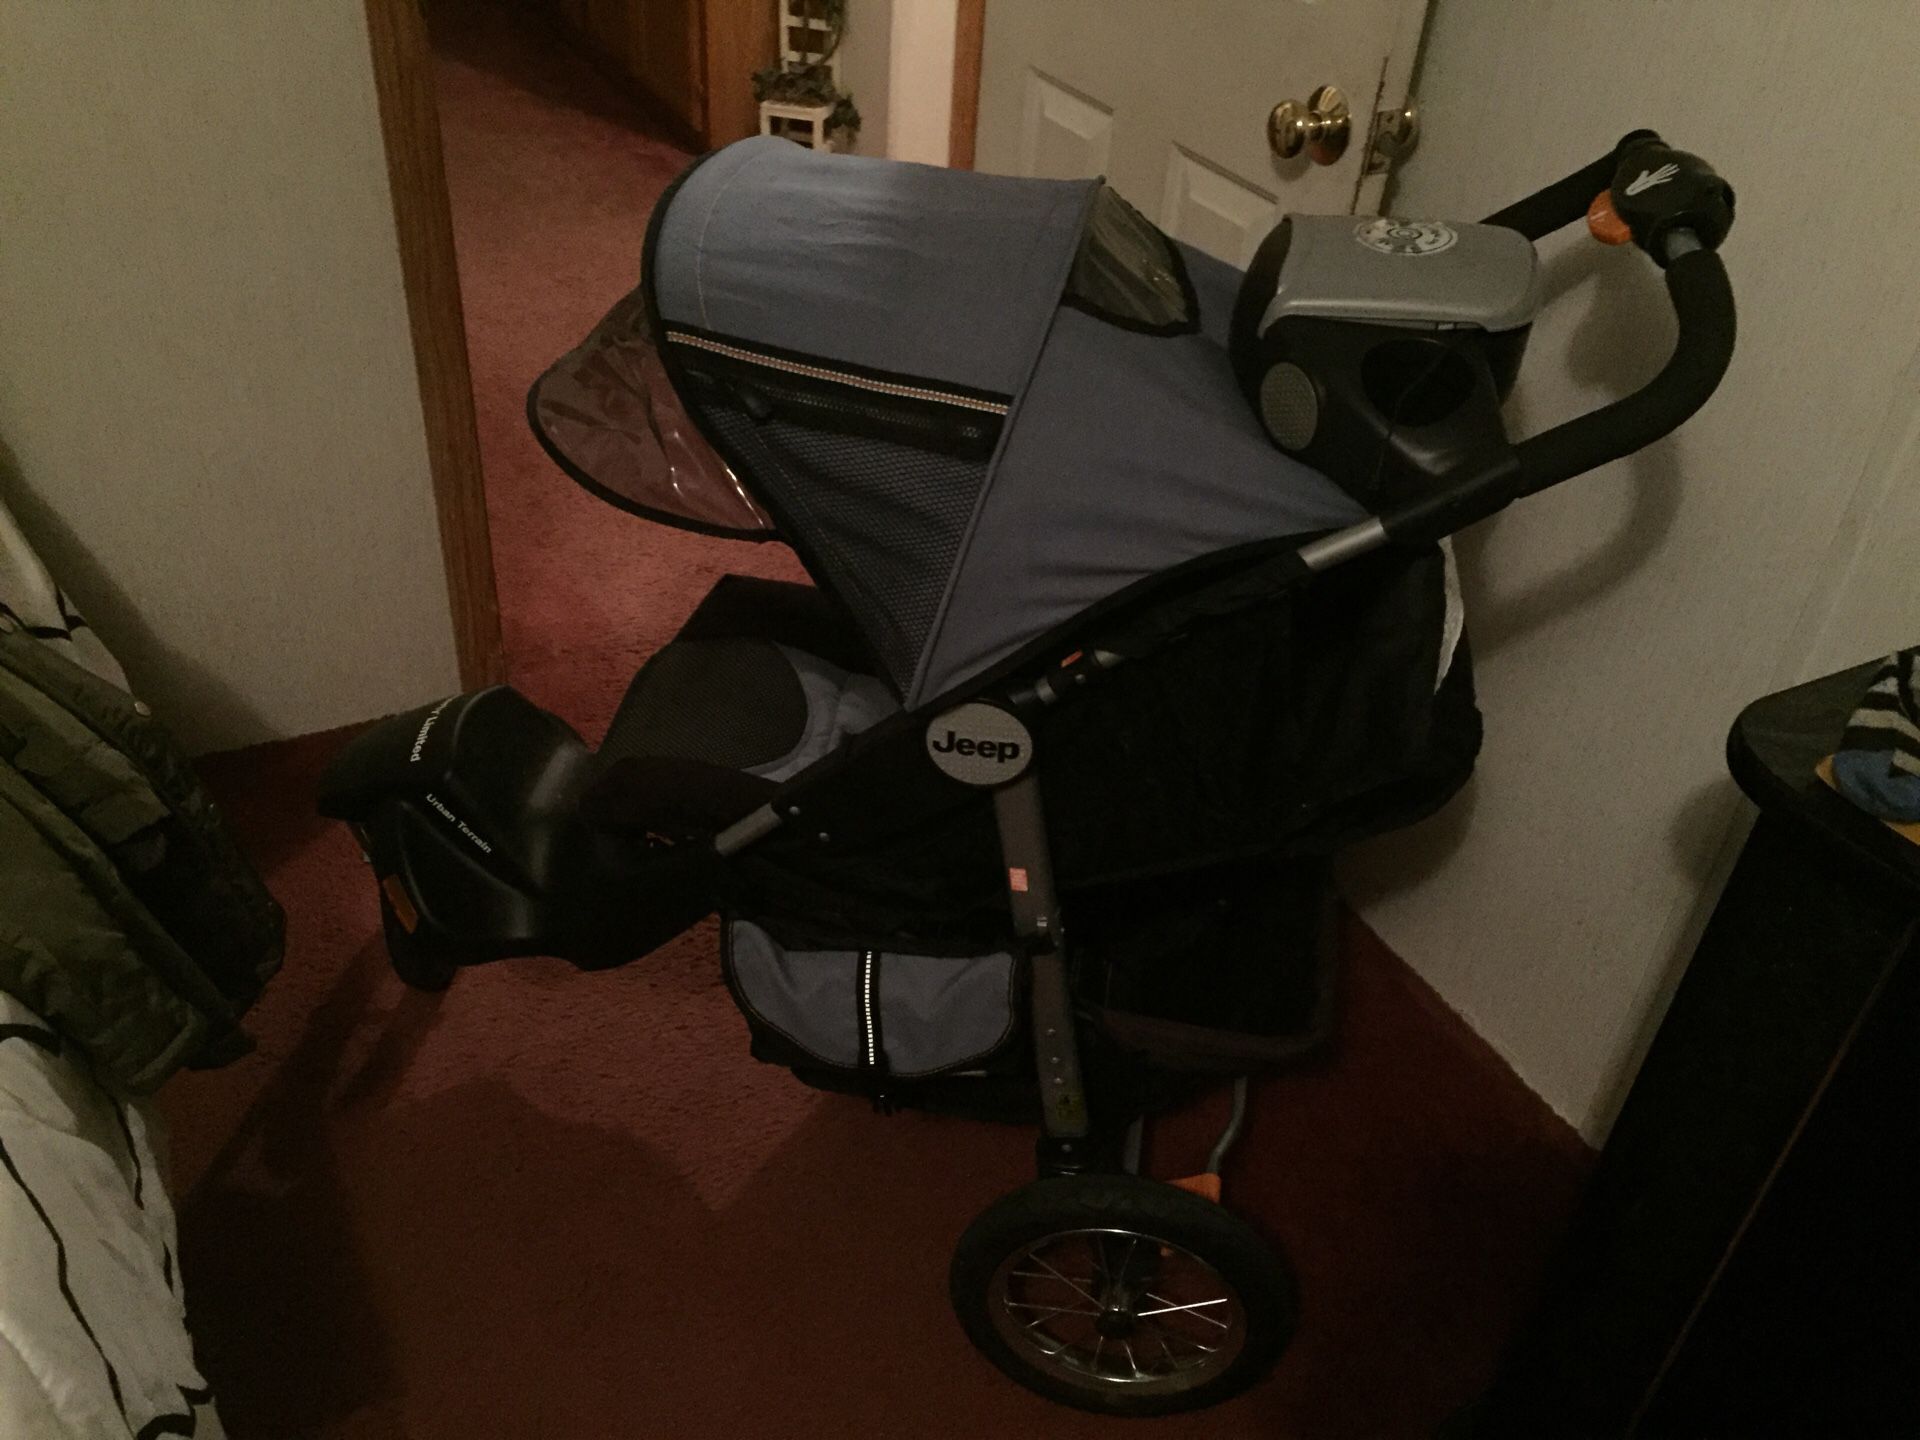 Jeep Liberty Limited Urban Terrain Jogger Stroller w/ Auxiliary Speakers